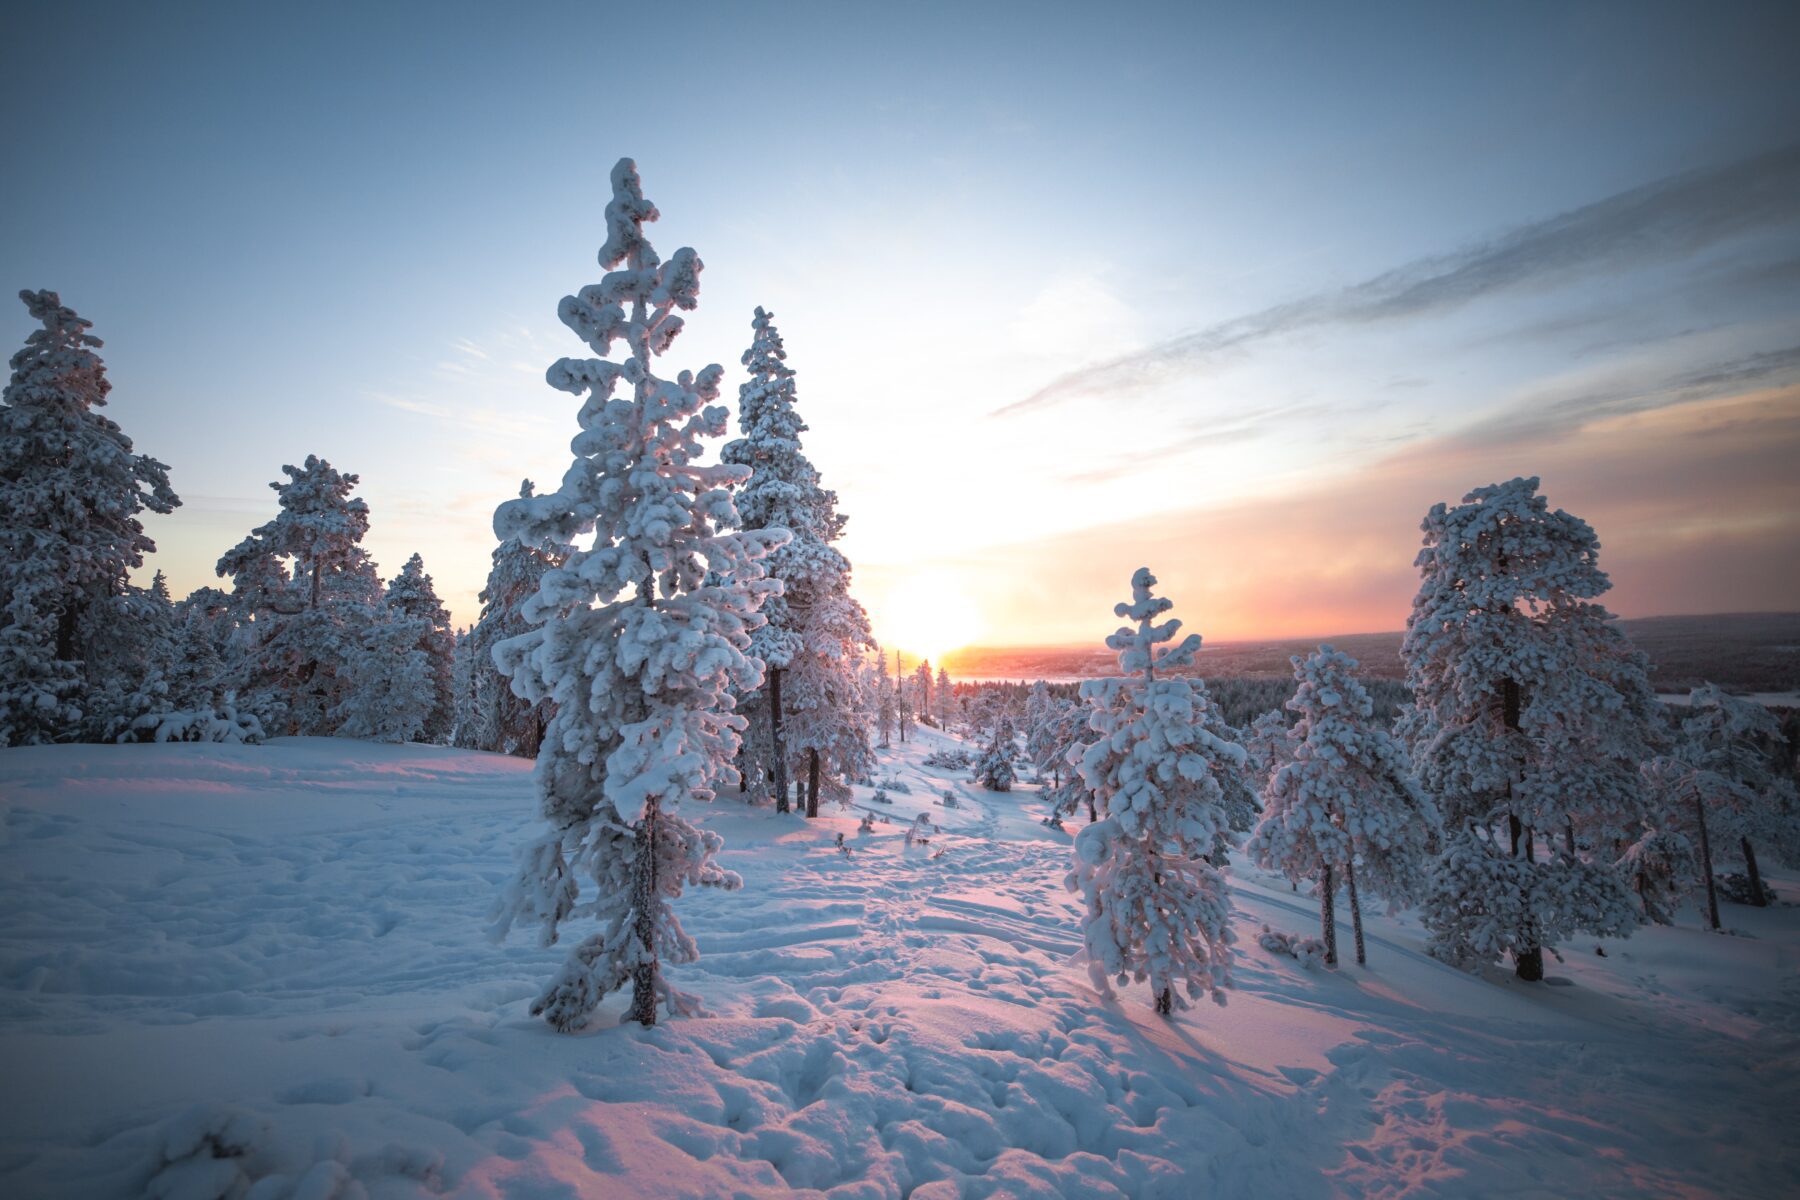 The Lapland Trail